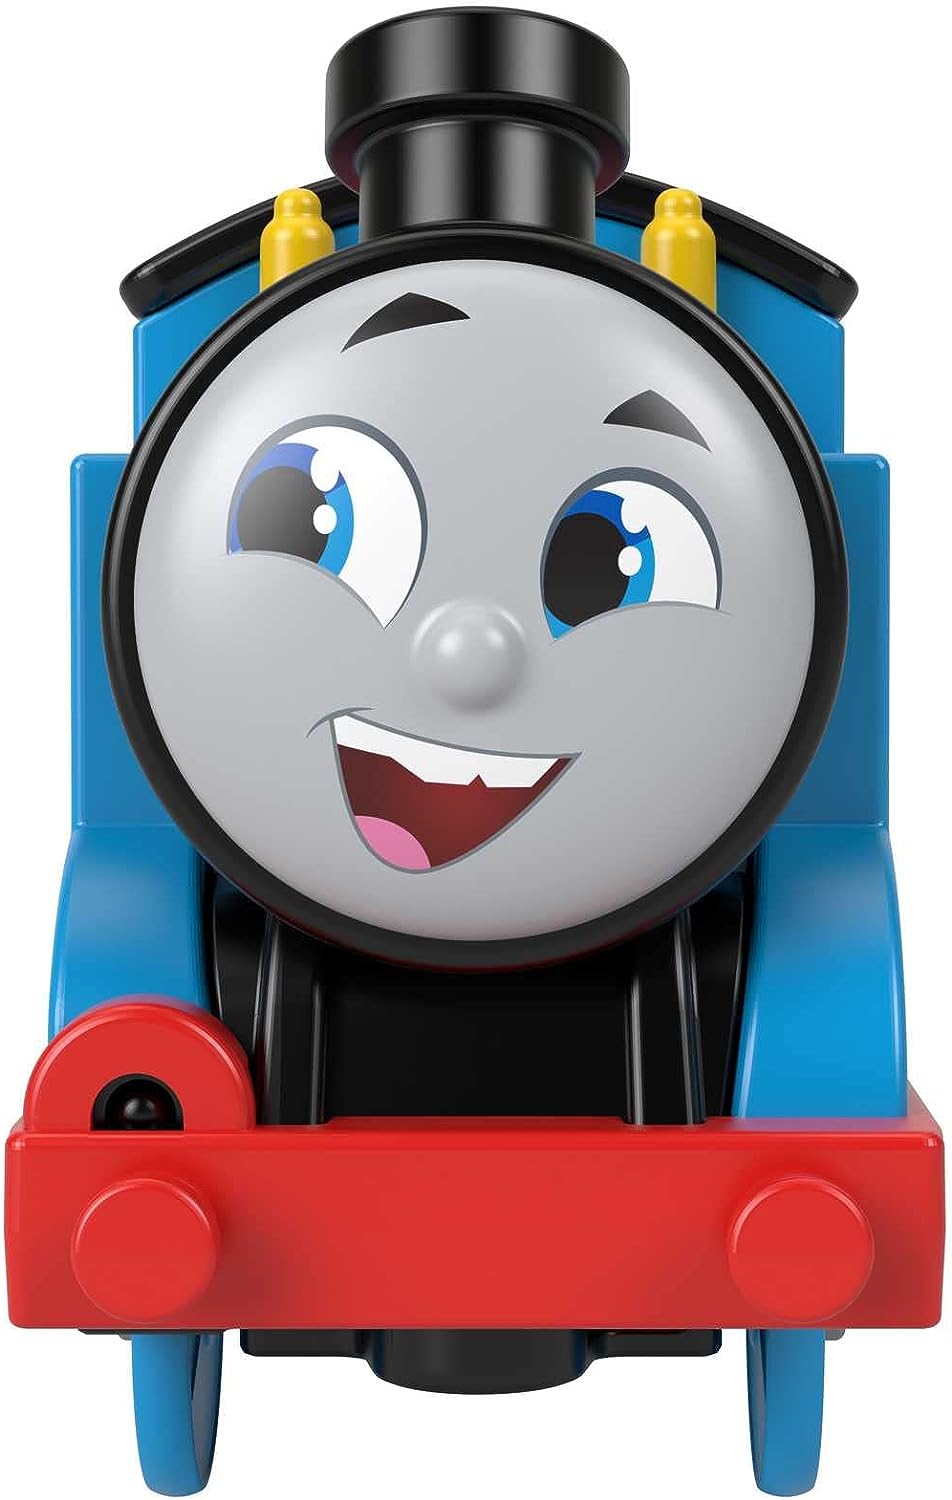 ??Fisher-Price Thomas & Friends Motorized Talking Thomas Engine with Annie & Clarabel